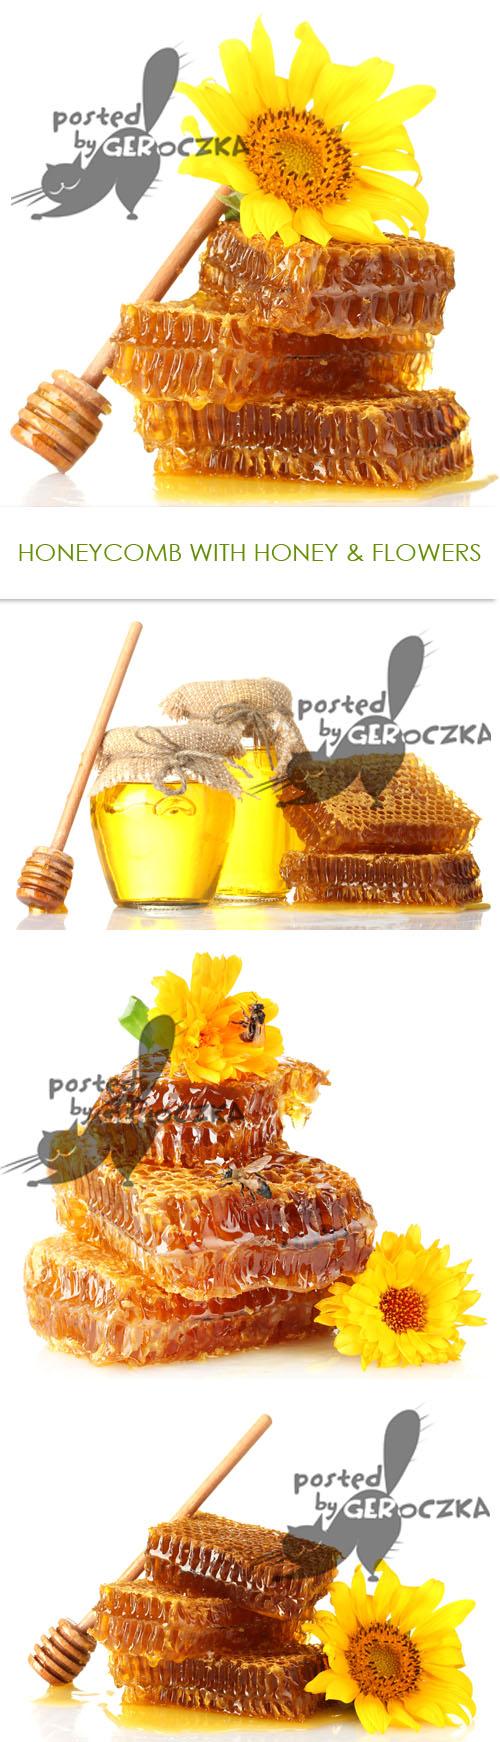 Honeycomb with honey and flowers